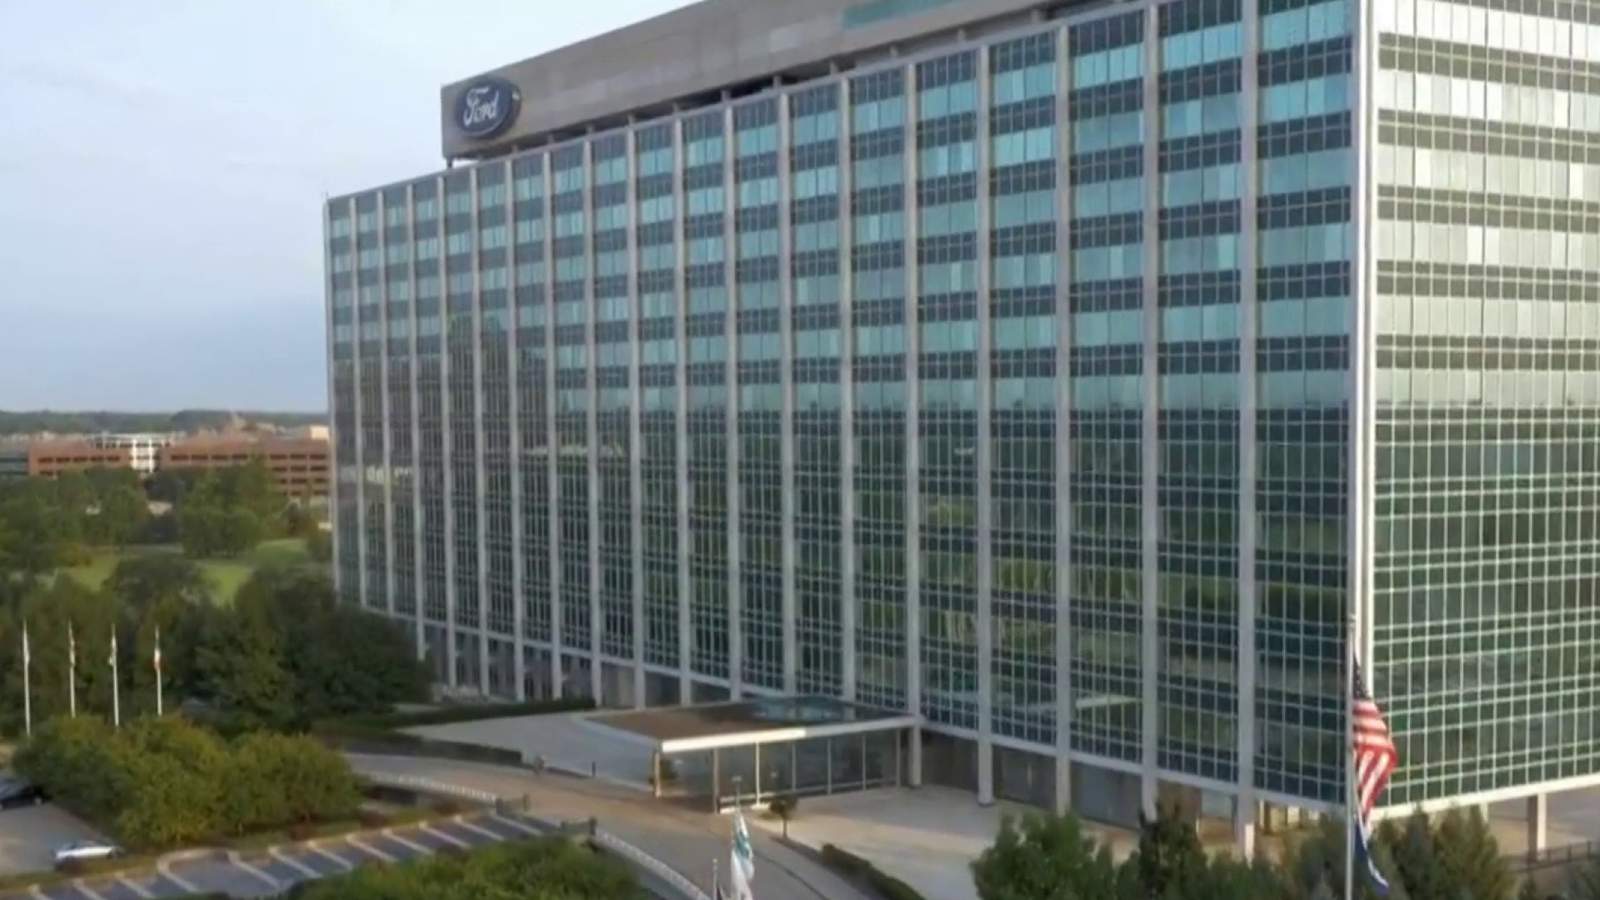 Ford gives salaried employees several work options amid COVID-19 pandemic